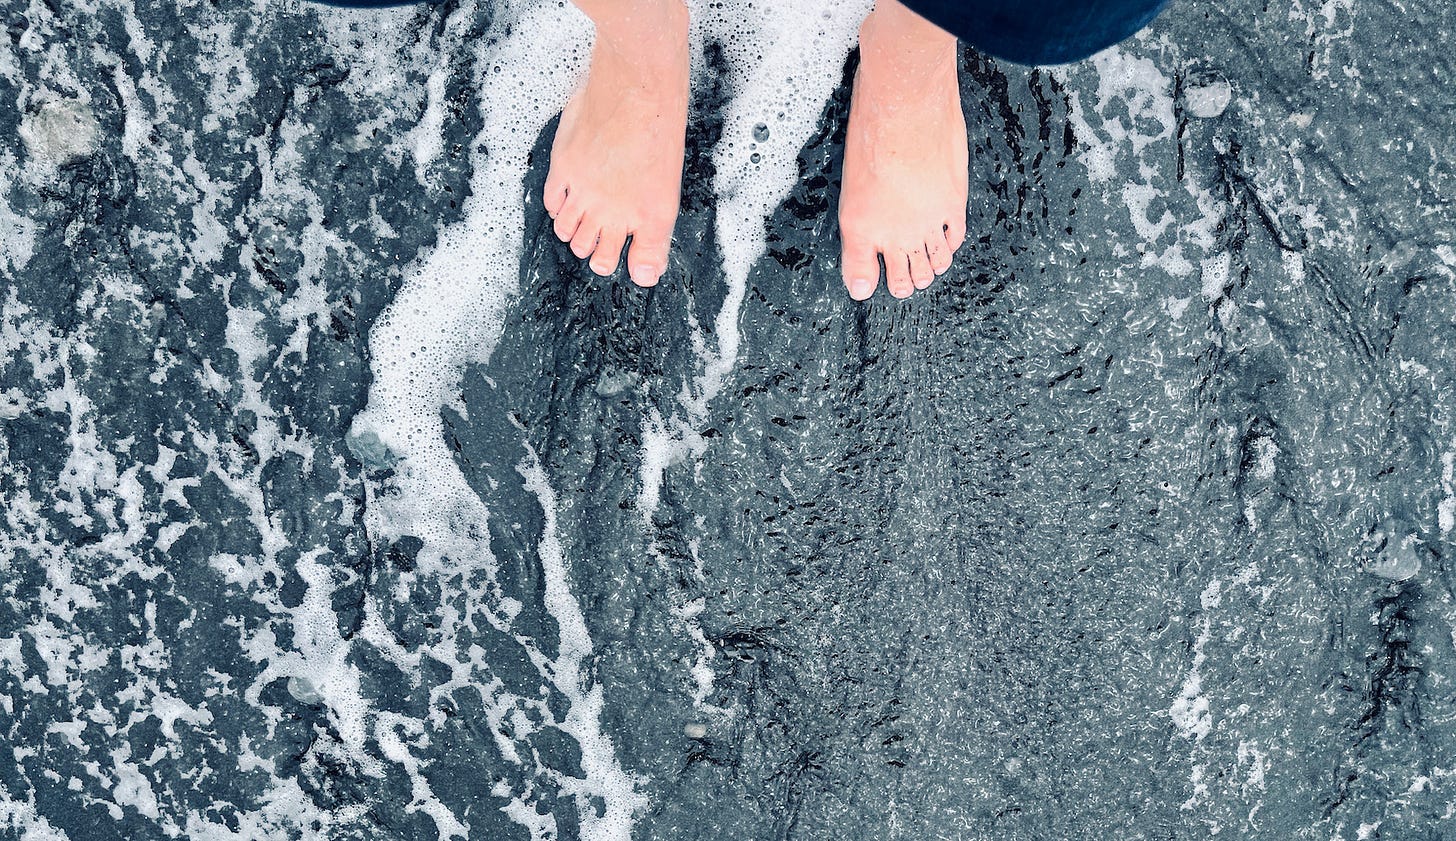 A receding wave leaves lines of foam and a thin, textured sheen of water on black sand and around a light-skinned person’s feet.